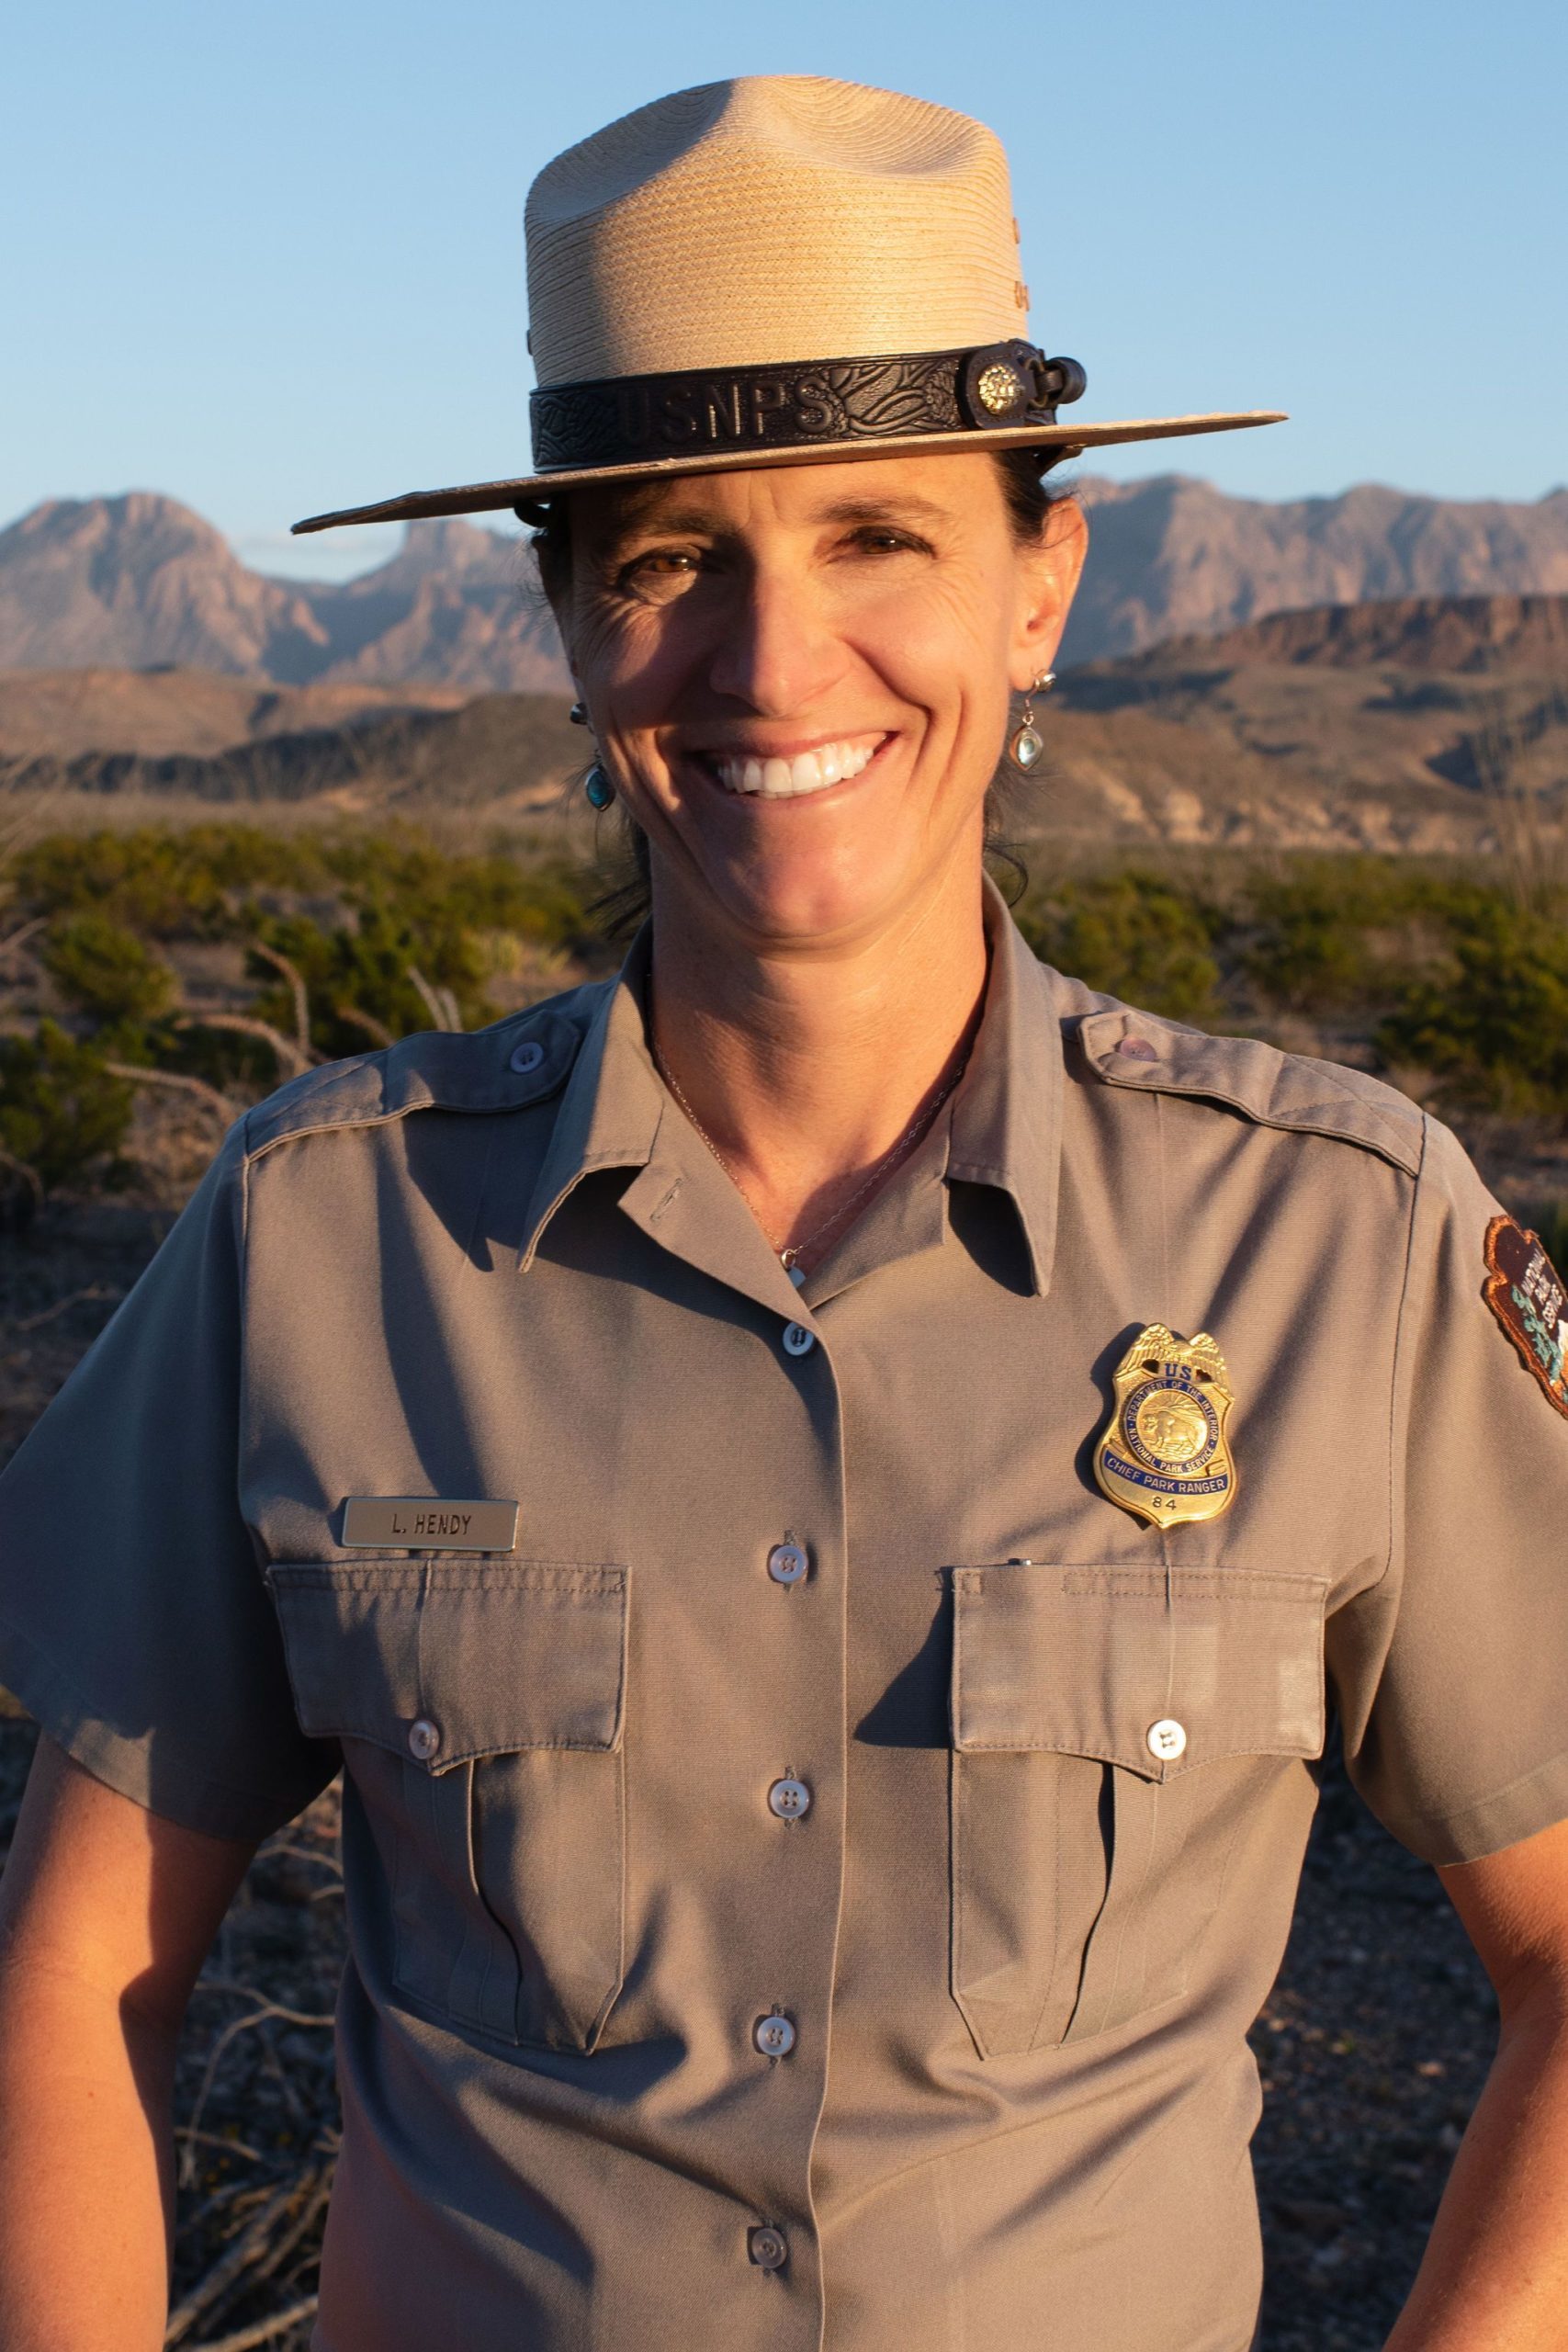 First Female Chief Ranger - Lisa Hendy will become the new Chief Ranger of the Great Smoky Mountains National Park in April. 